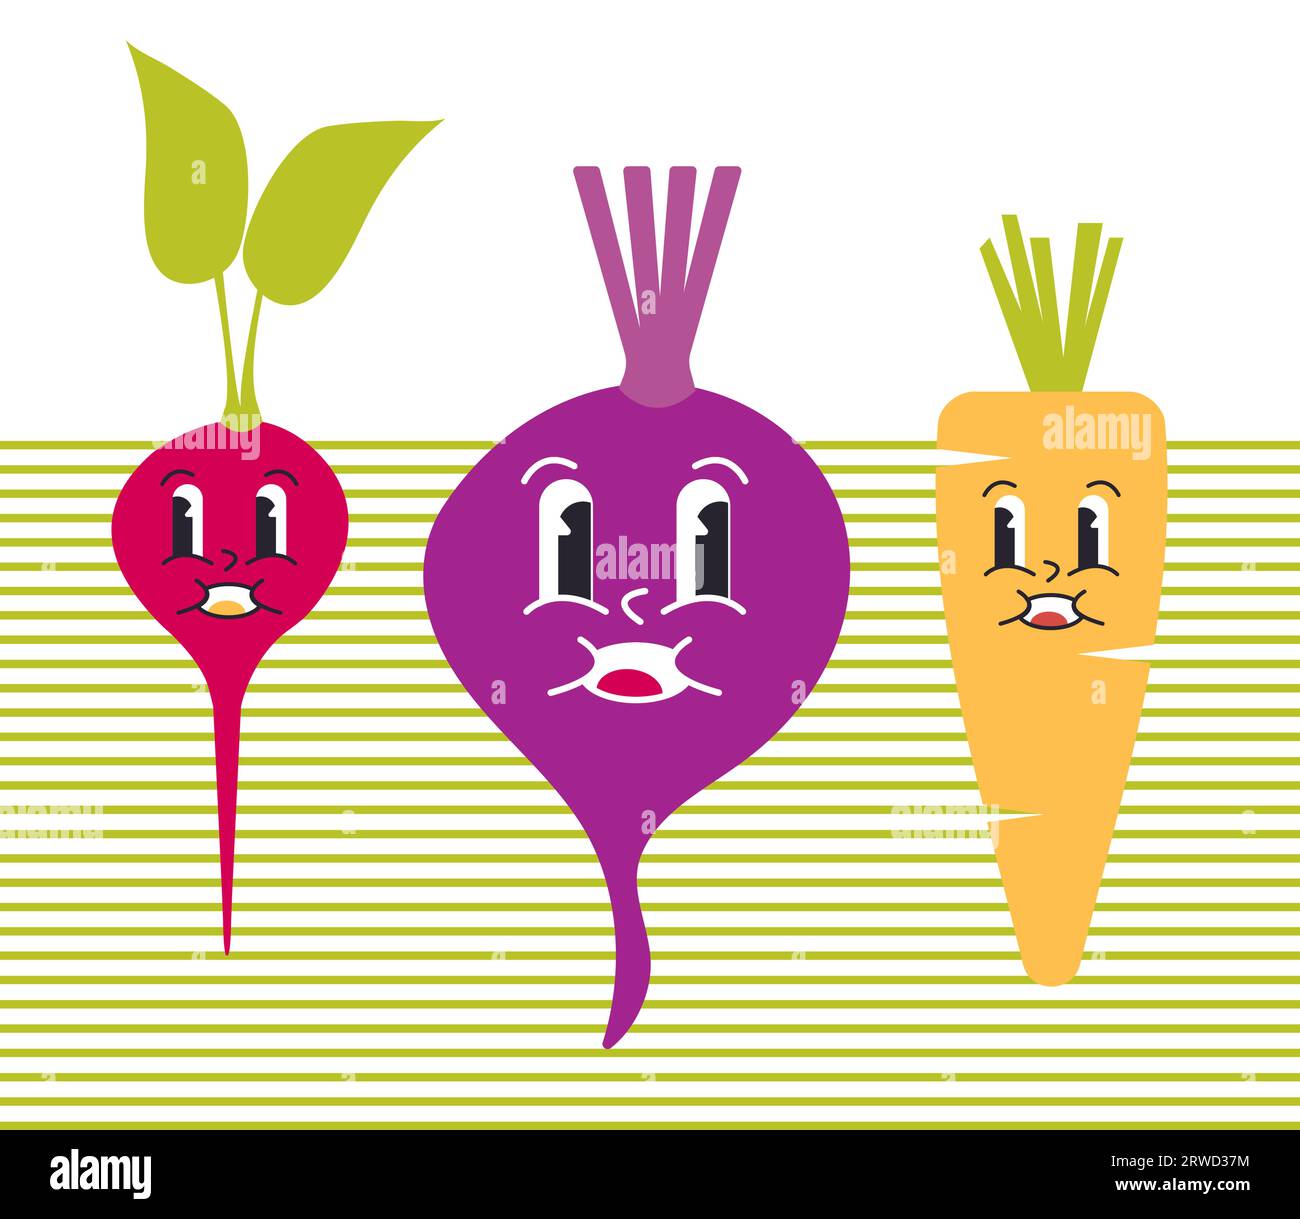 Groovy Cute Vegetable Set of Radish, Beetroot, Carrot Characters Isolated Stock Vector